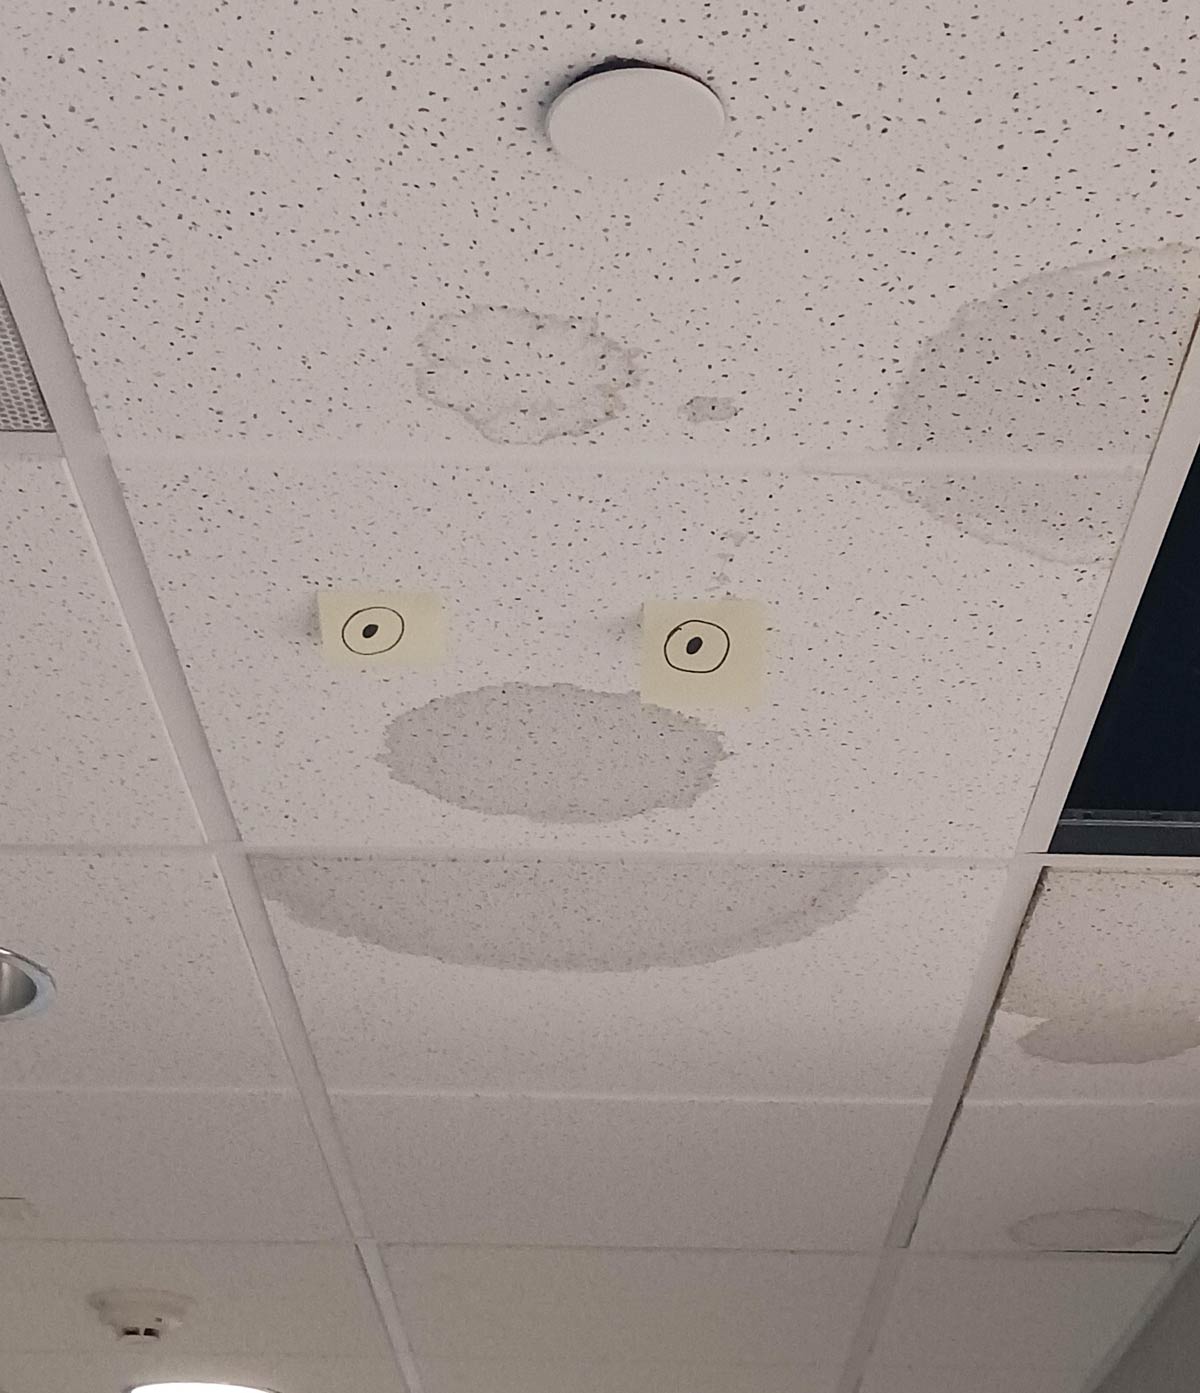 Ceiling at work was leaking... I fix